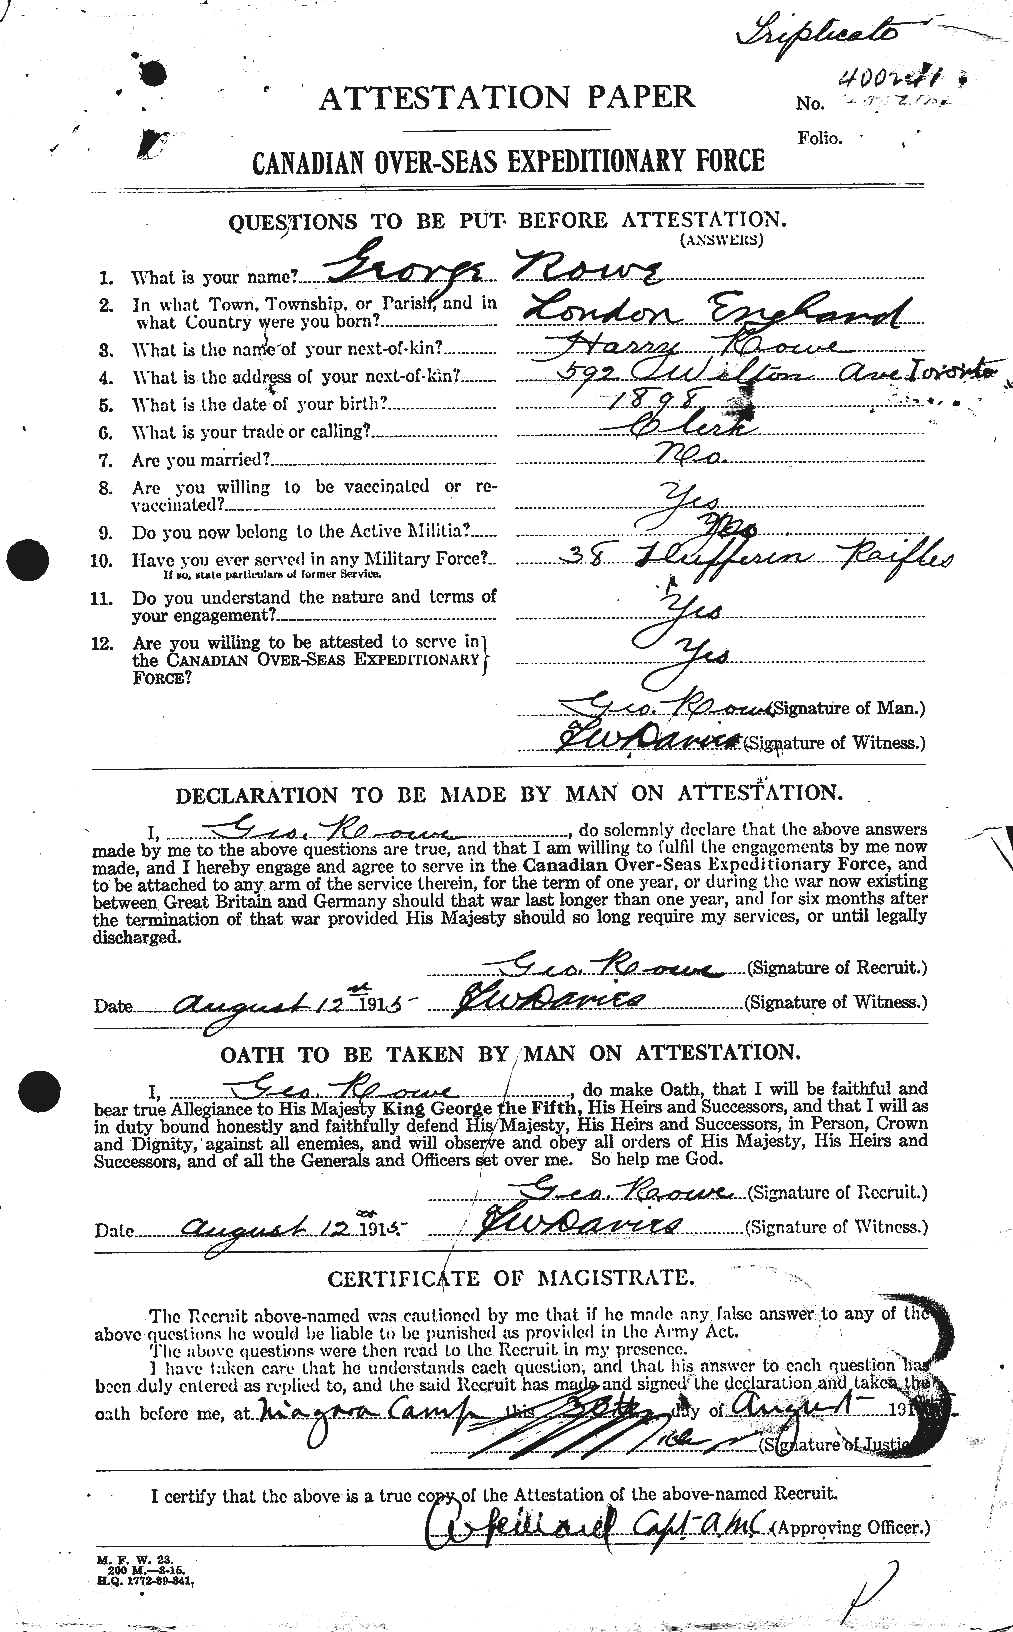 Personnel Records of the First World War - CEF 615872a